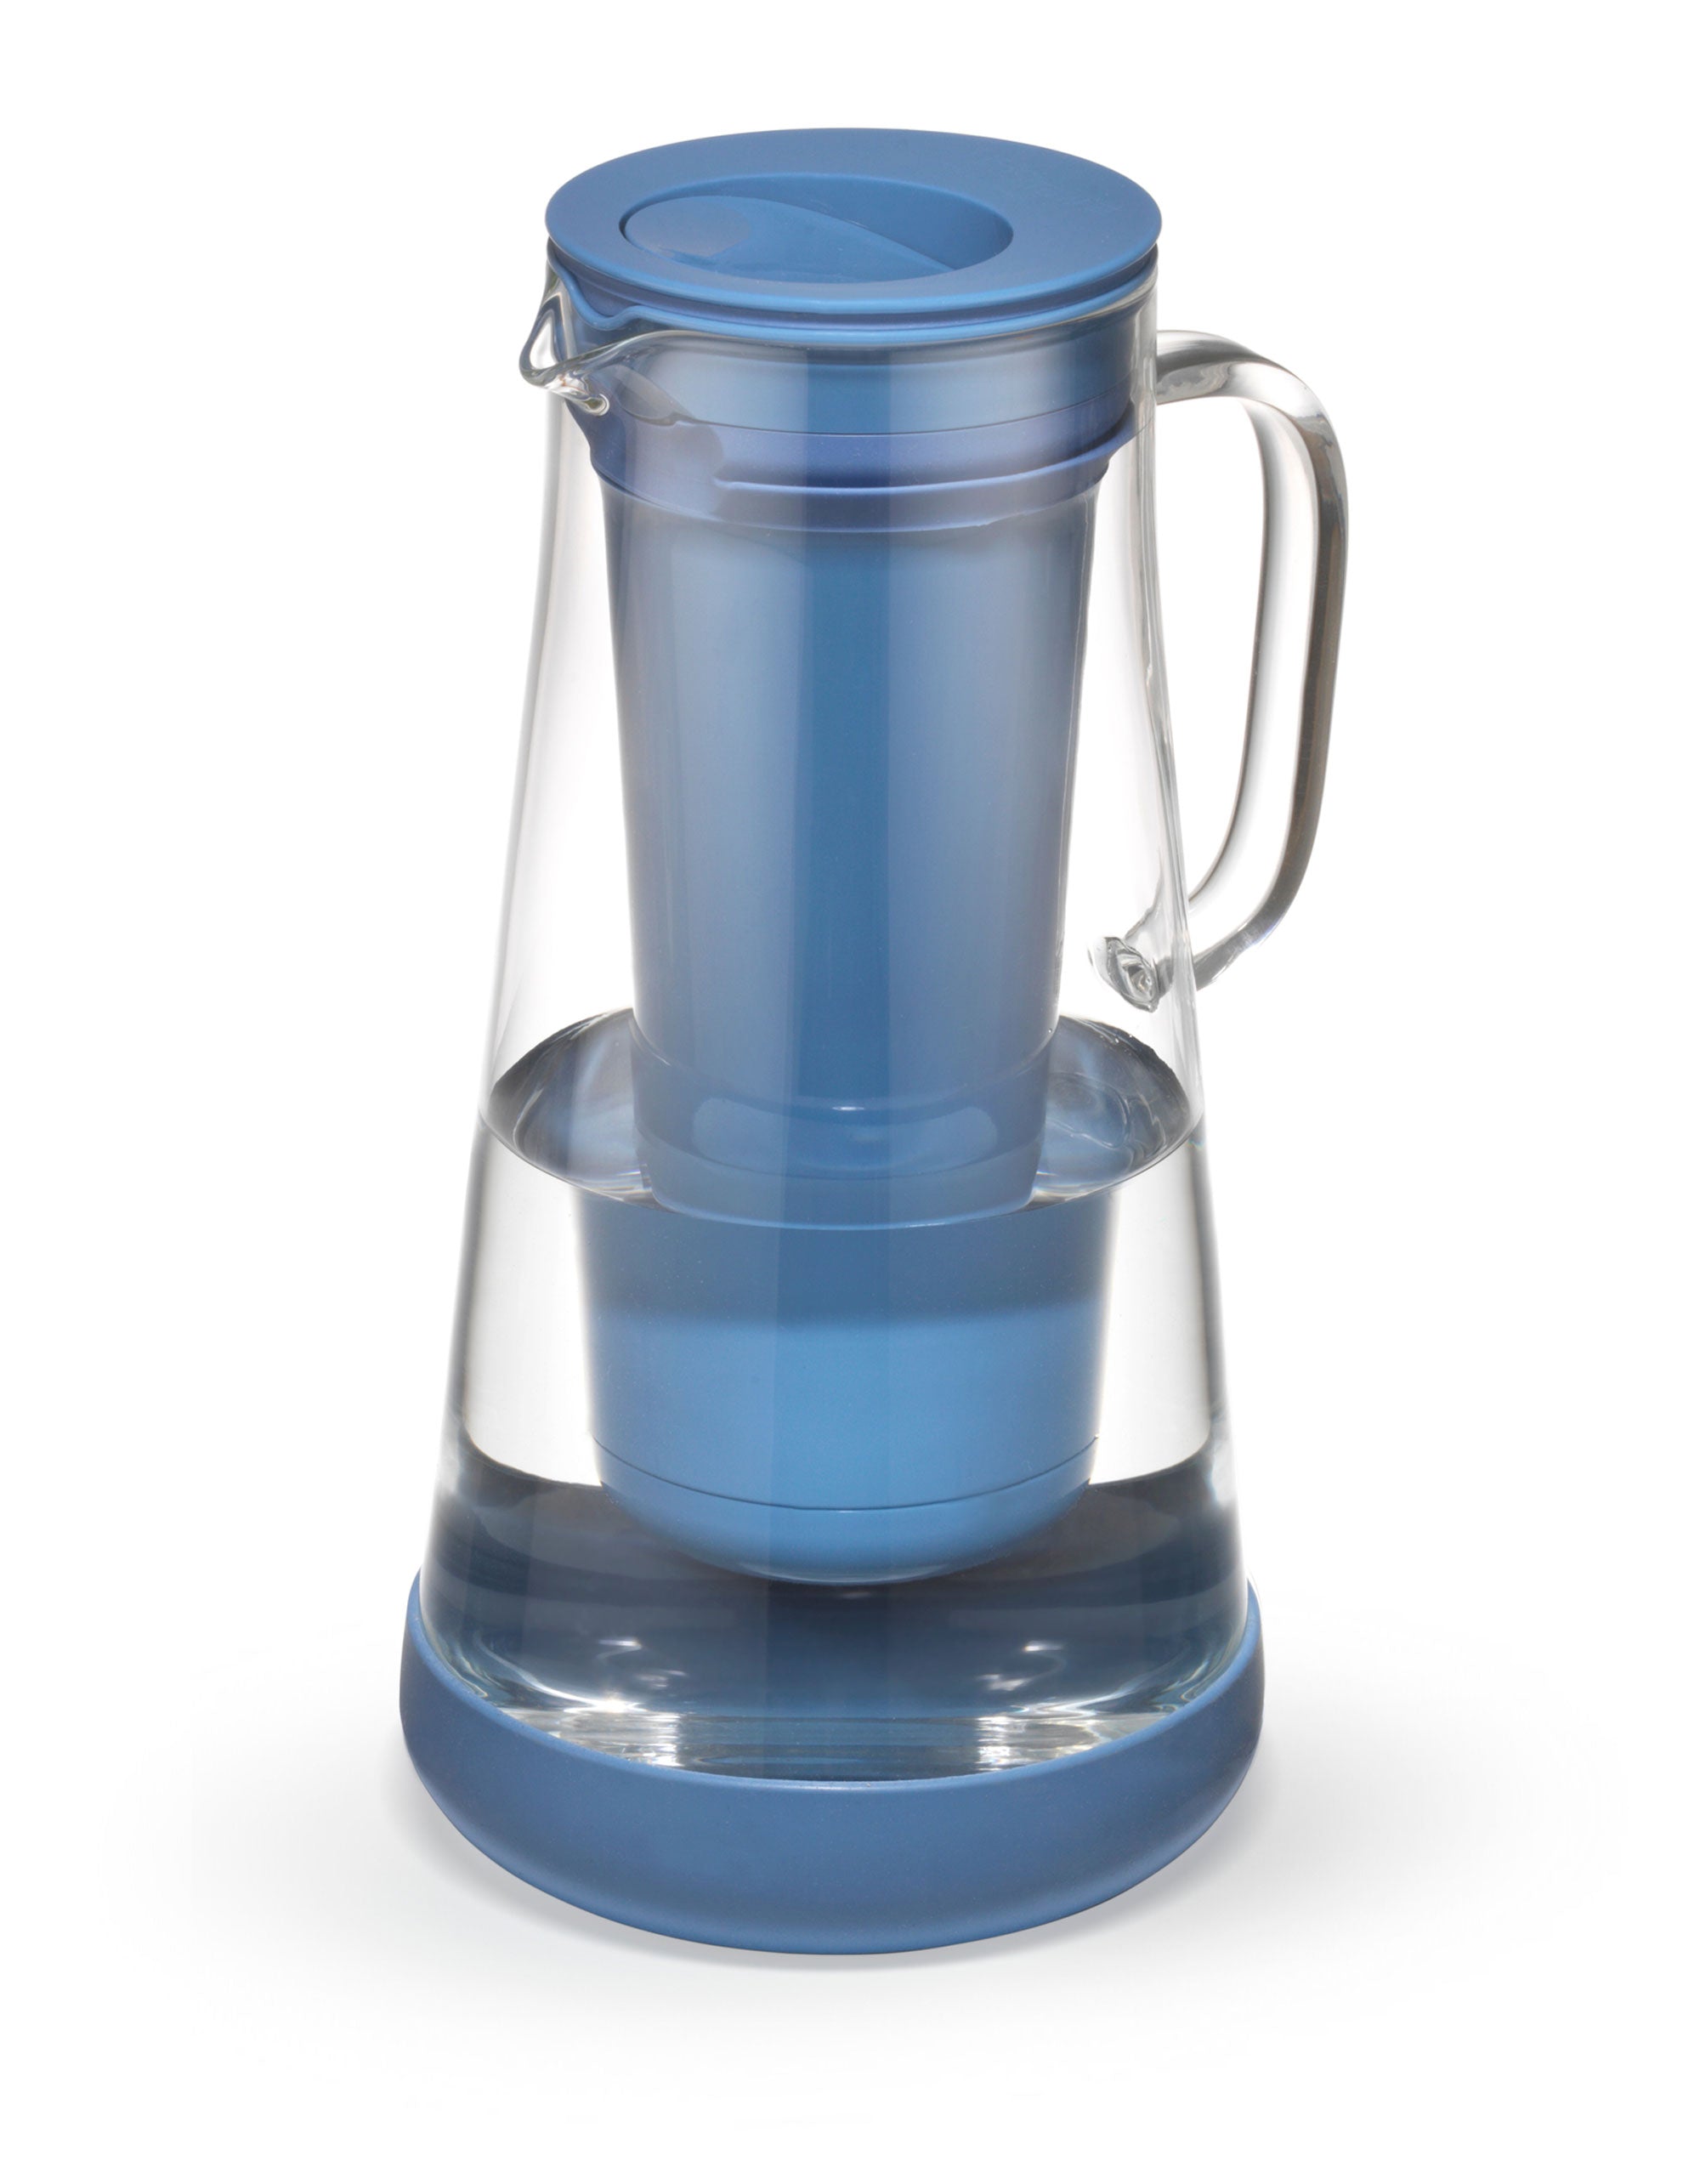 LifeStraw Home 7-Cup Blue Glass Water Filter Pitcher + Reviews